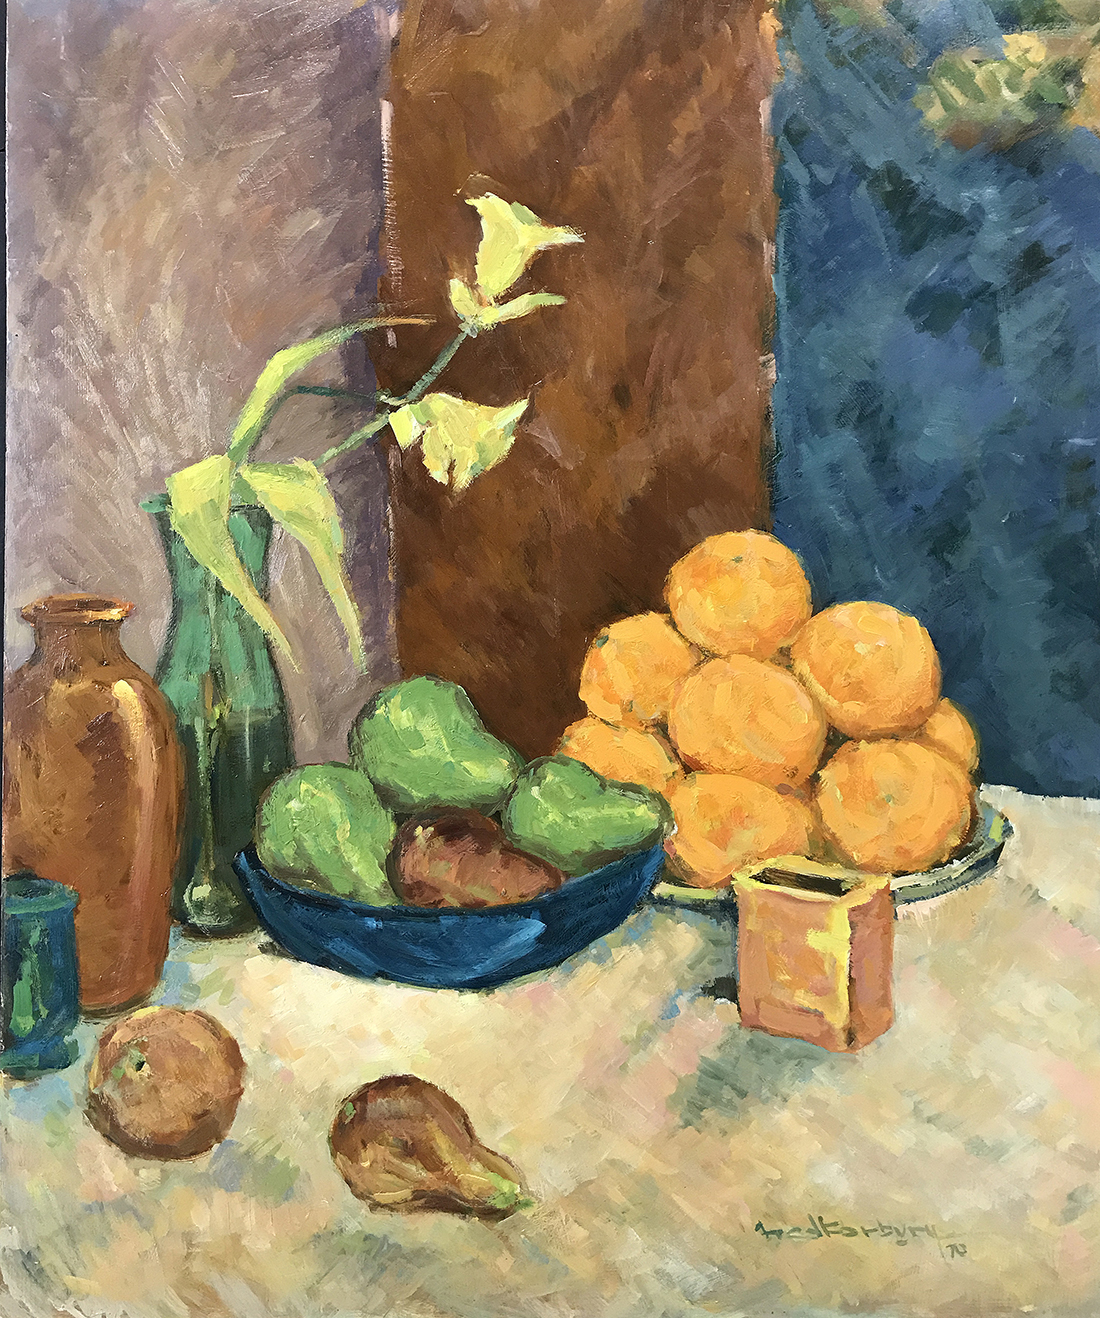 Fred Korburg (American/Danish, 1896-1986), "Still Life," 1970, acrylic on masonite, signed and dated